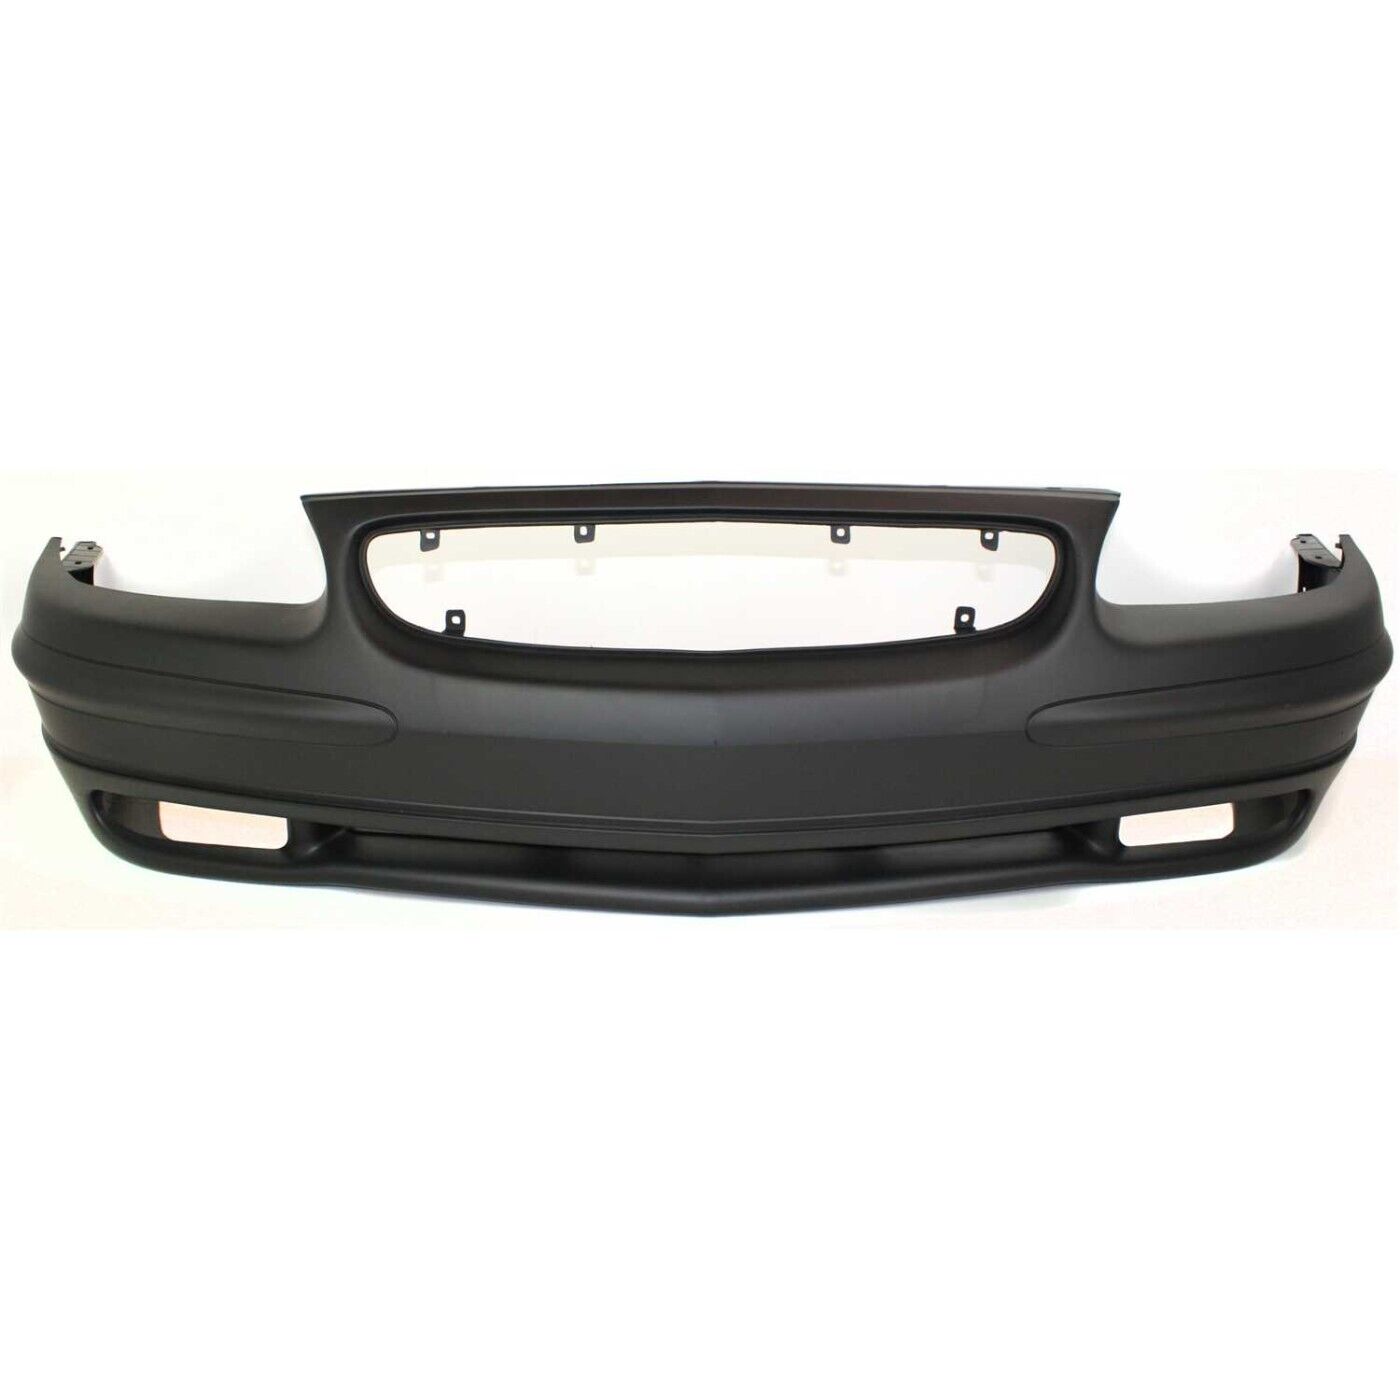 Front Bumper Cover For 97-2004 Buick Regal w/ fog lamp holes Primed